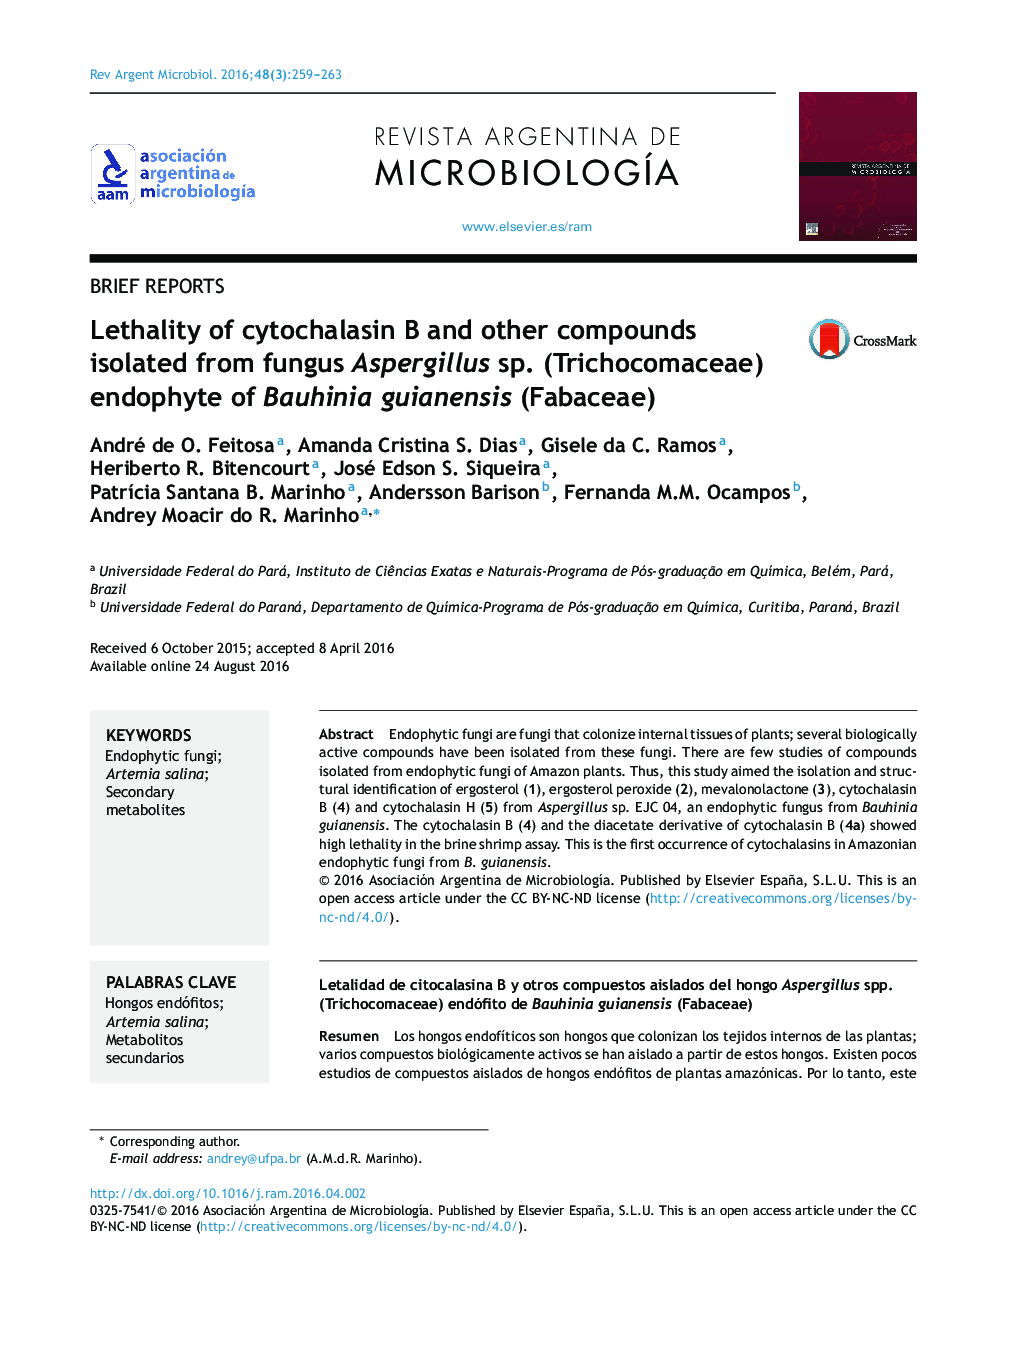 Lethality of cytochalasin B and other compounds isolated from fungus Aspergillus sp. (Trichocomaceae) endophyte of Bauhinia guianensis (Fabaceae)